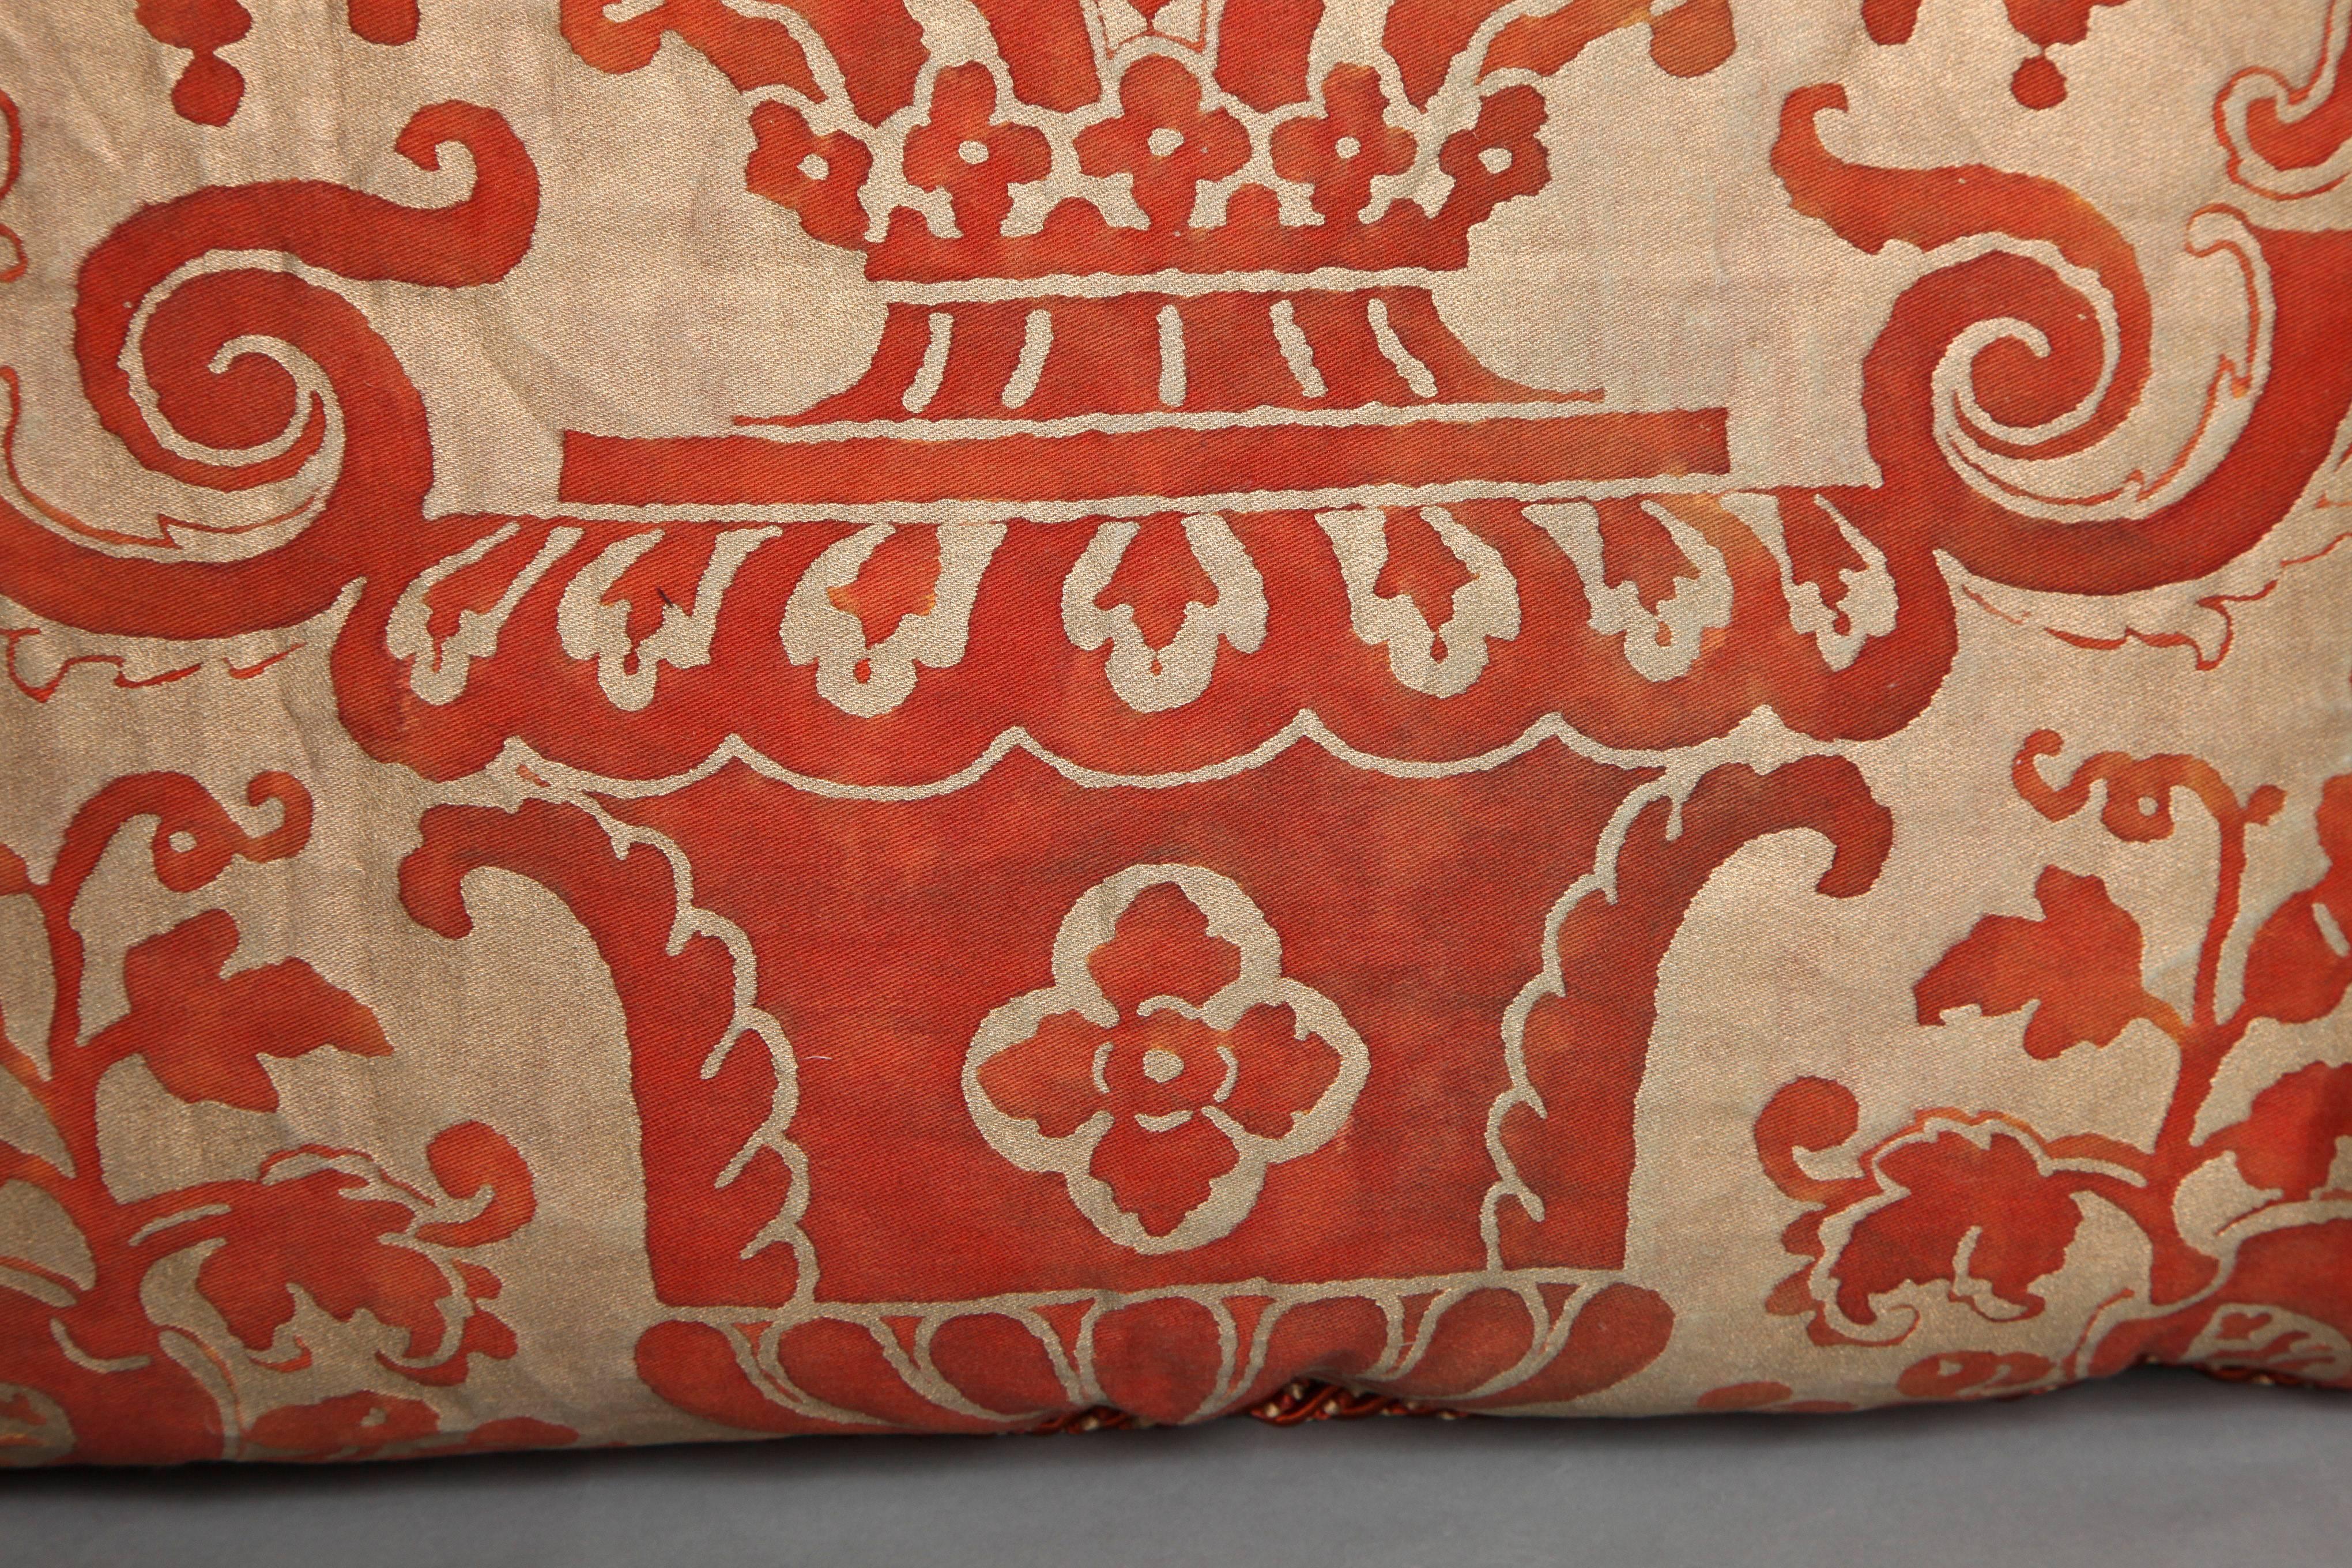 Damask Pair of Fortuny Fabric Cushions in the Carnavalet Pattern